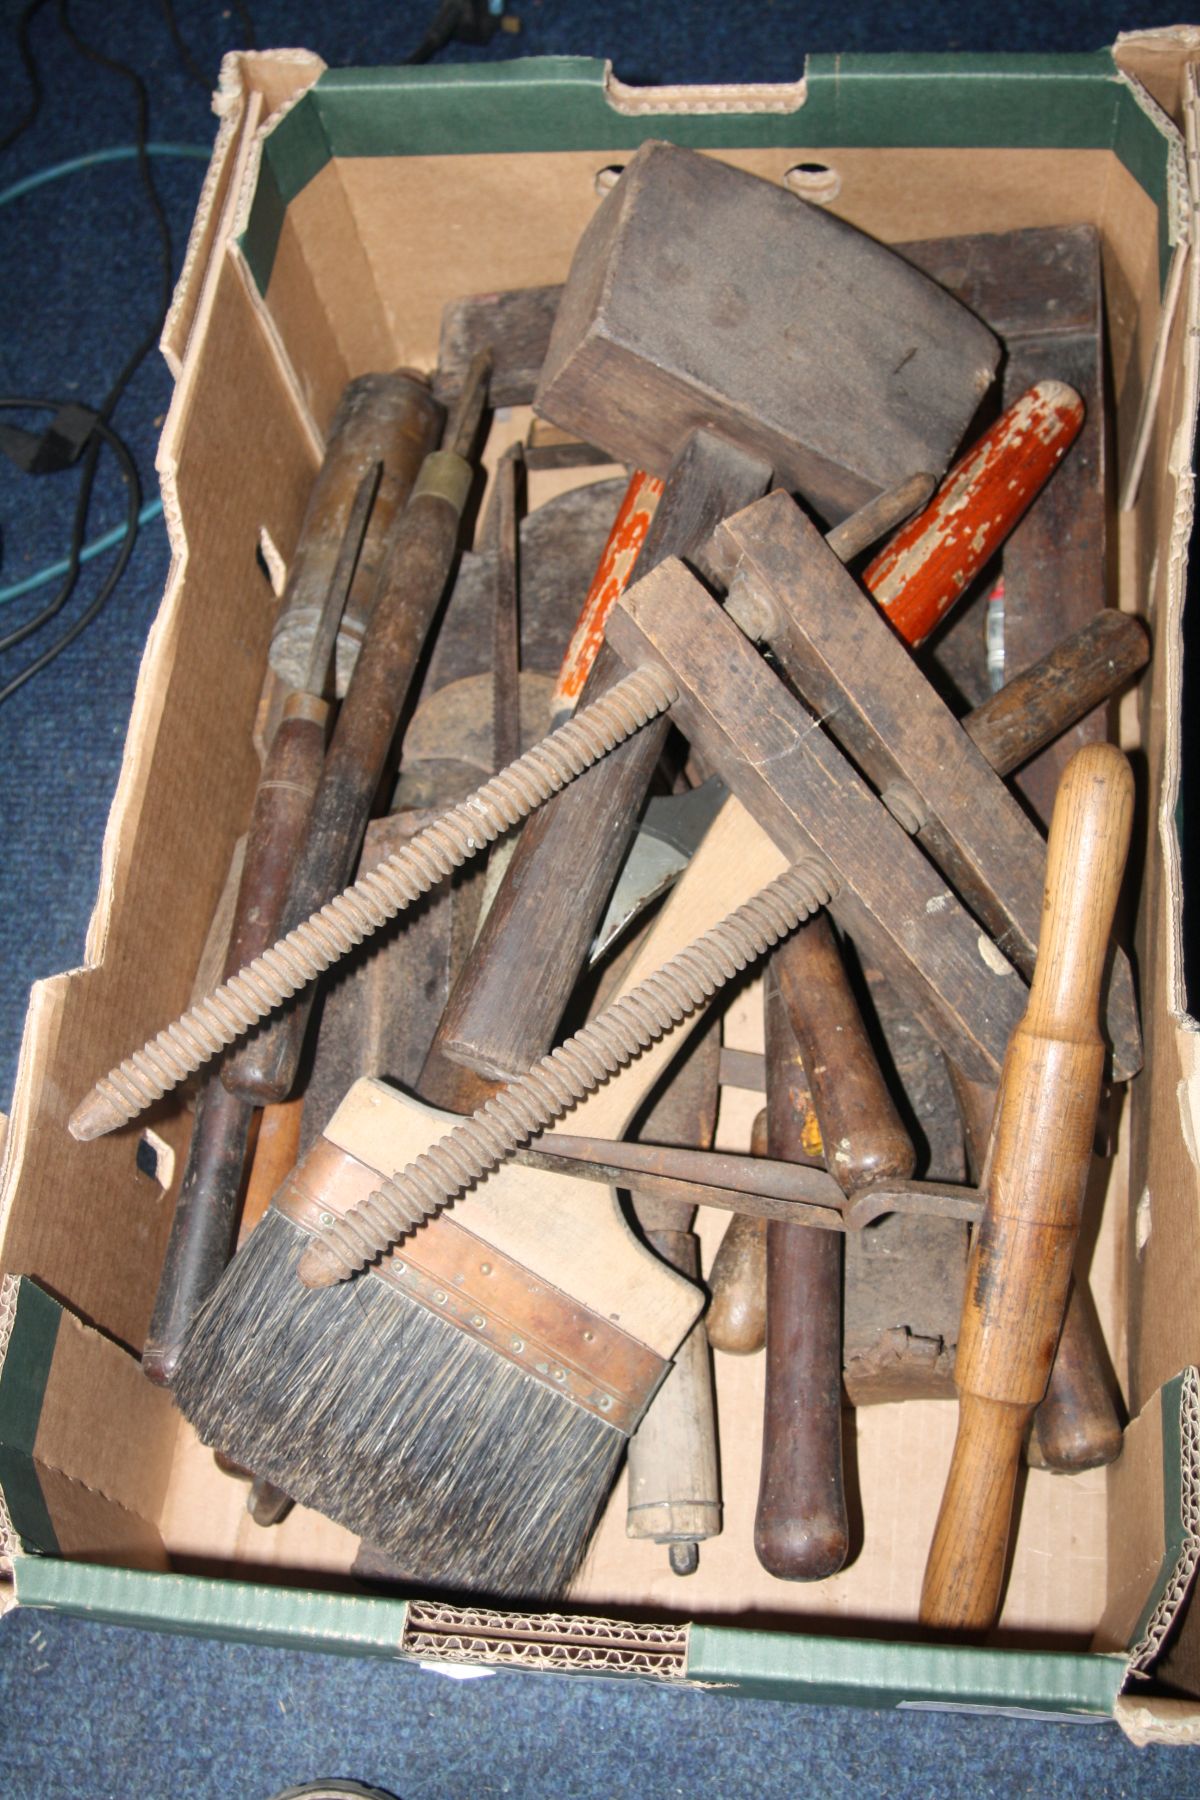 FIVE BOXES OF VARIOUS HAND TOOLS, to include planes, saws, hand sythes, files, chizels, hammers, - Image 5 of 14